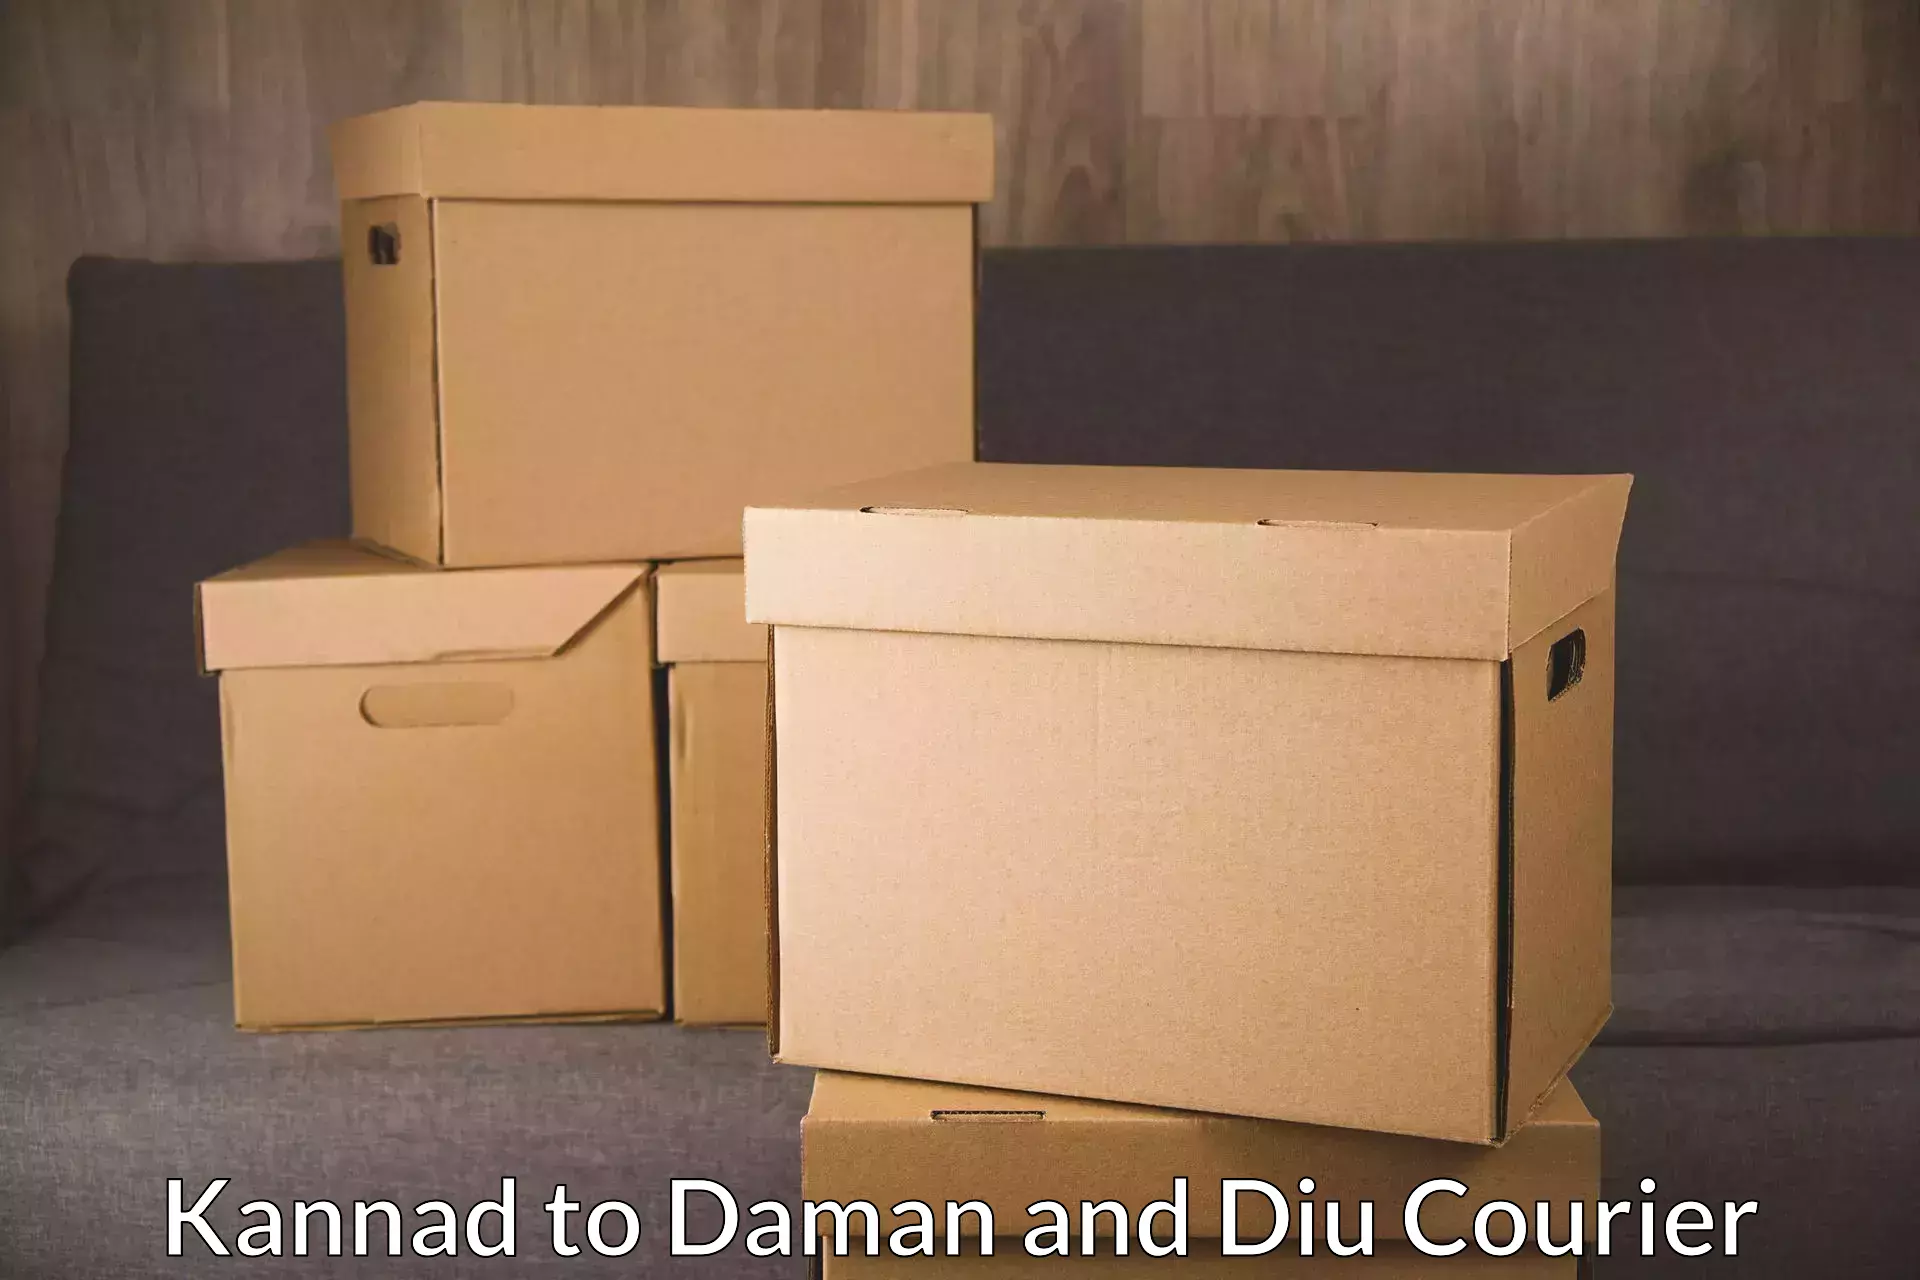 Supply chain efficiency in Kannad to Daman